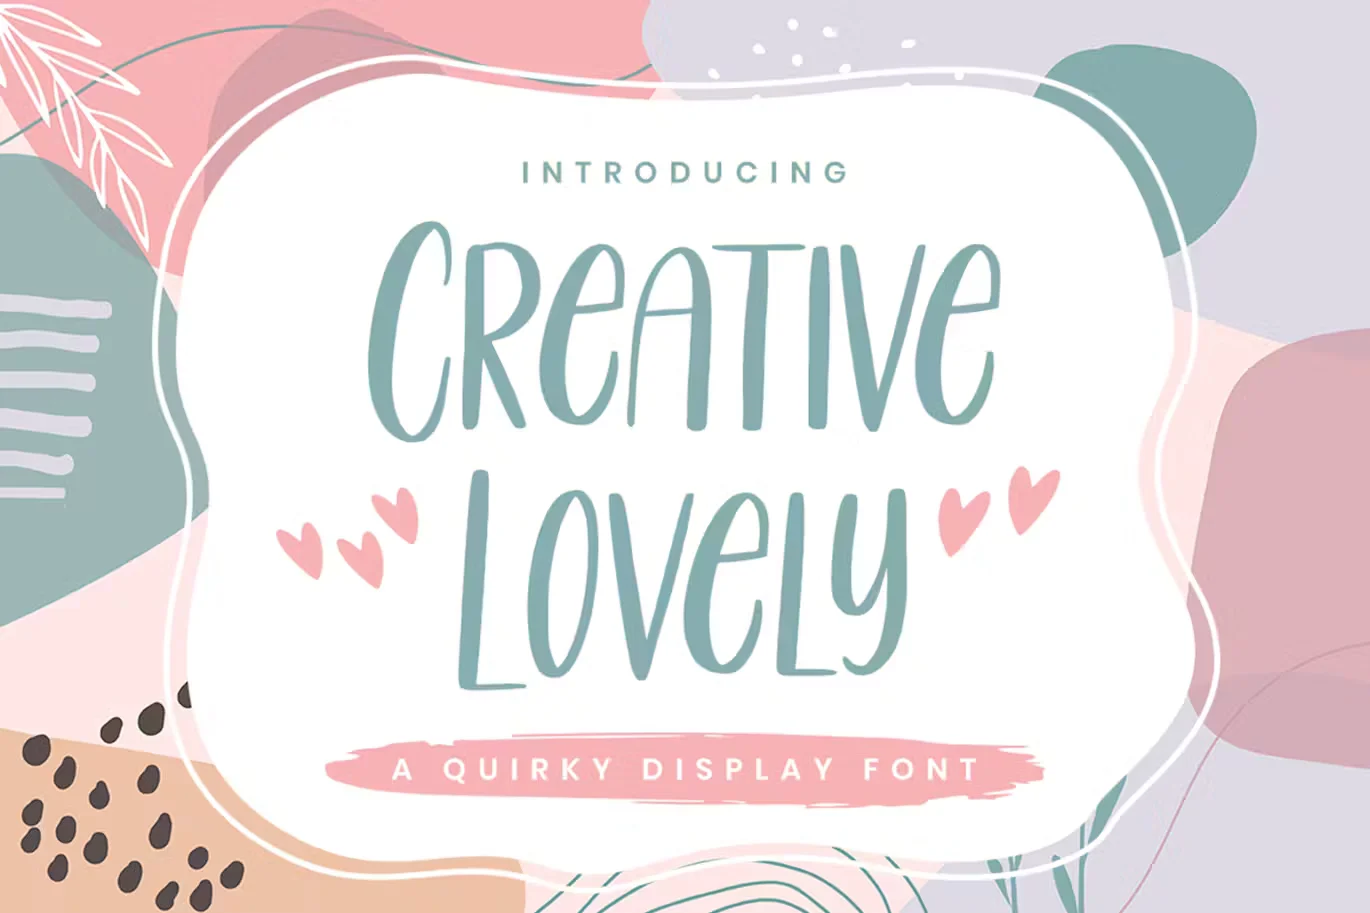 Creative Lovely - Display Font